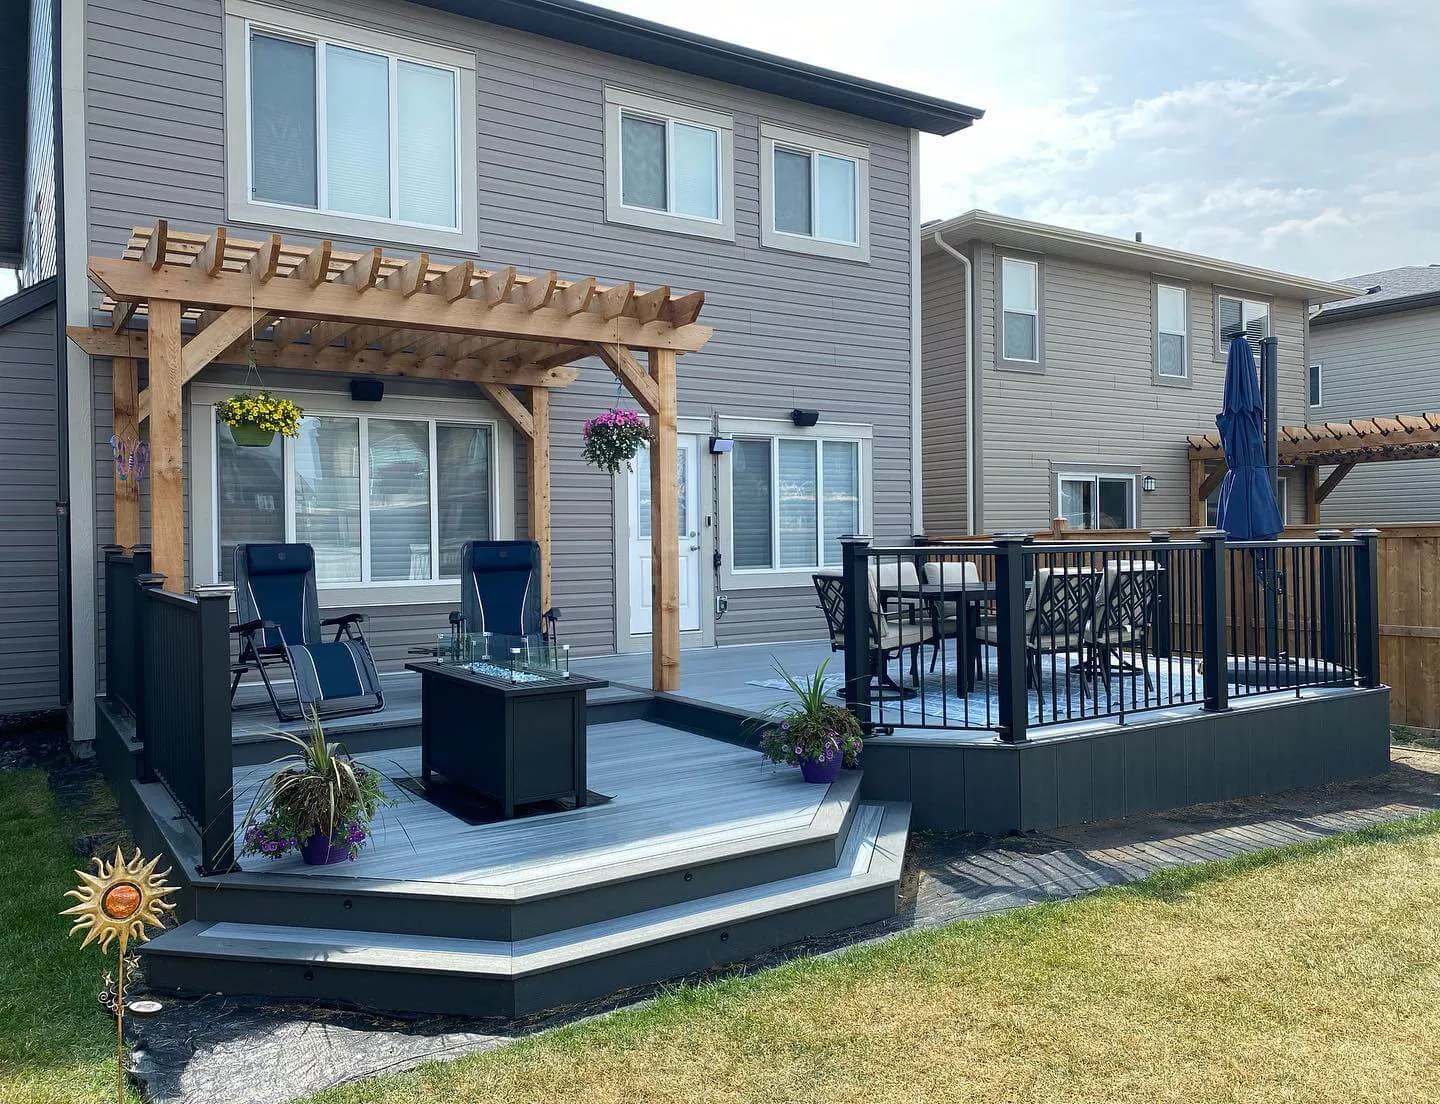 Deck vs. Patio - The Pros and Cons